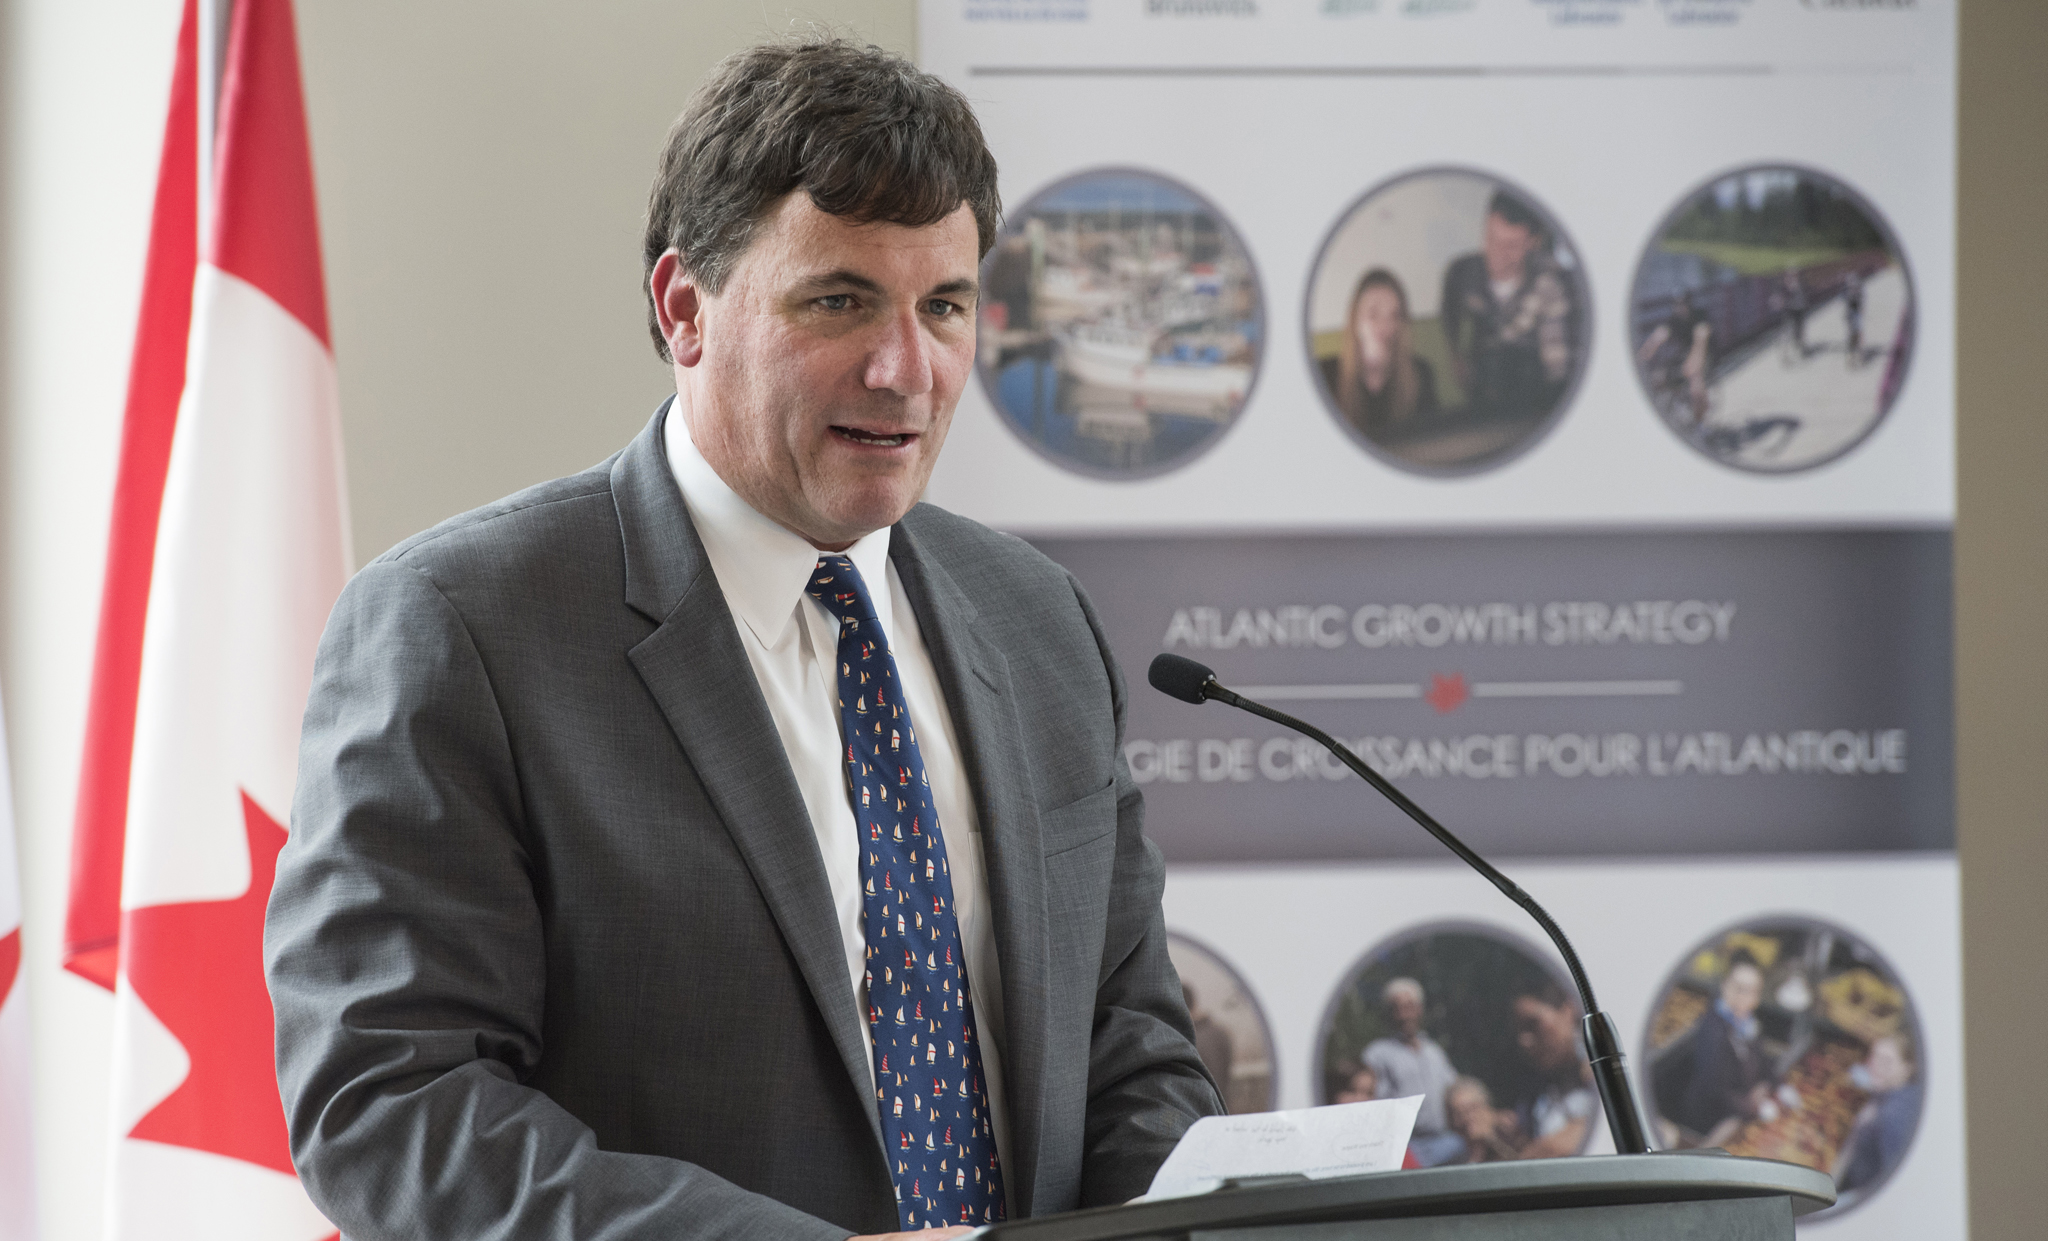 July 4, 2017 - The Honourable Dominic LeBlanc, Minister of Fisheries, Oceans and the Canadian Coast Guard, and member of the Atlantic Leadership Committee, highlights the importance of the Atlantic Growth Strategy at the launch of the Atlantic Trade and Investment Growth Strategy in Saint John, New Brunswick.